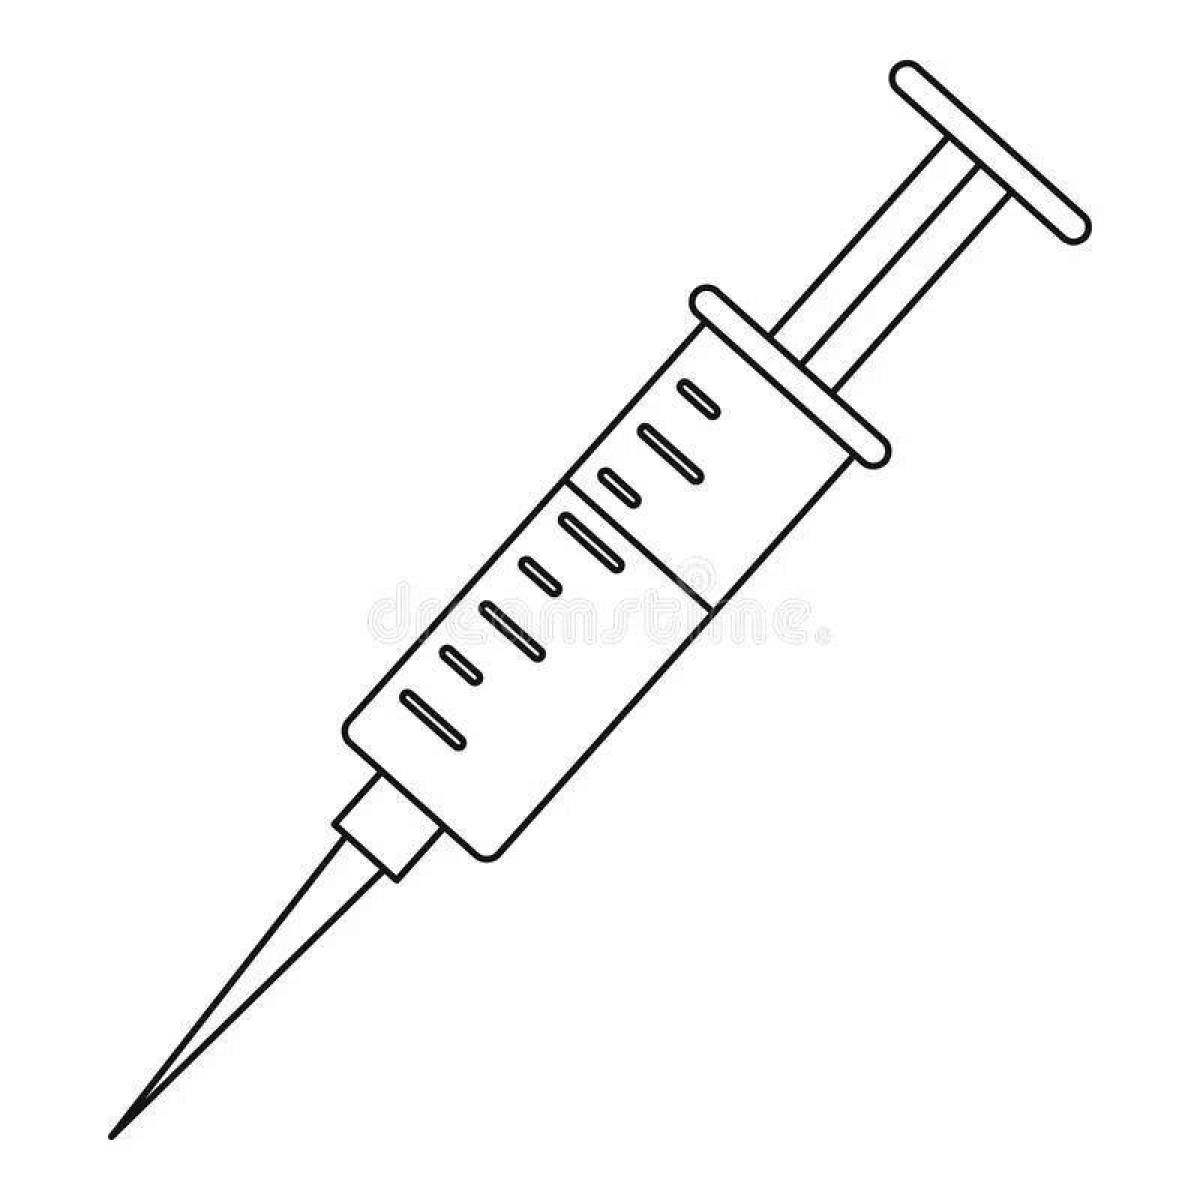 Glowing syringe coloring page